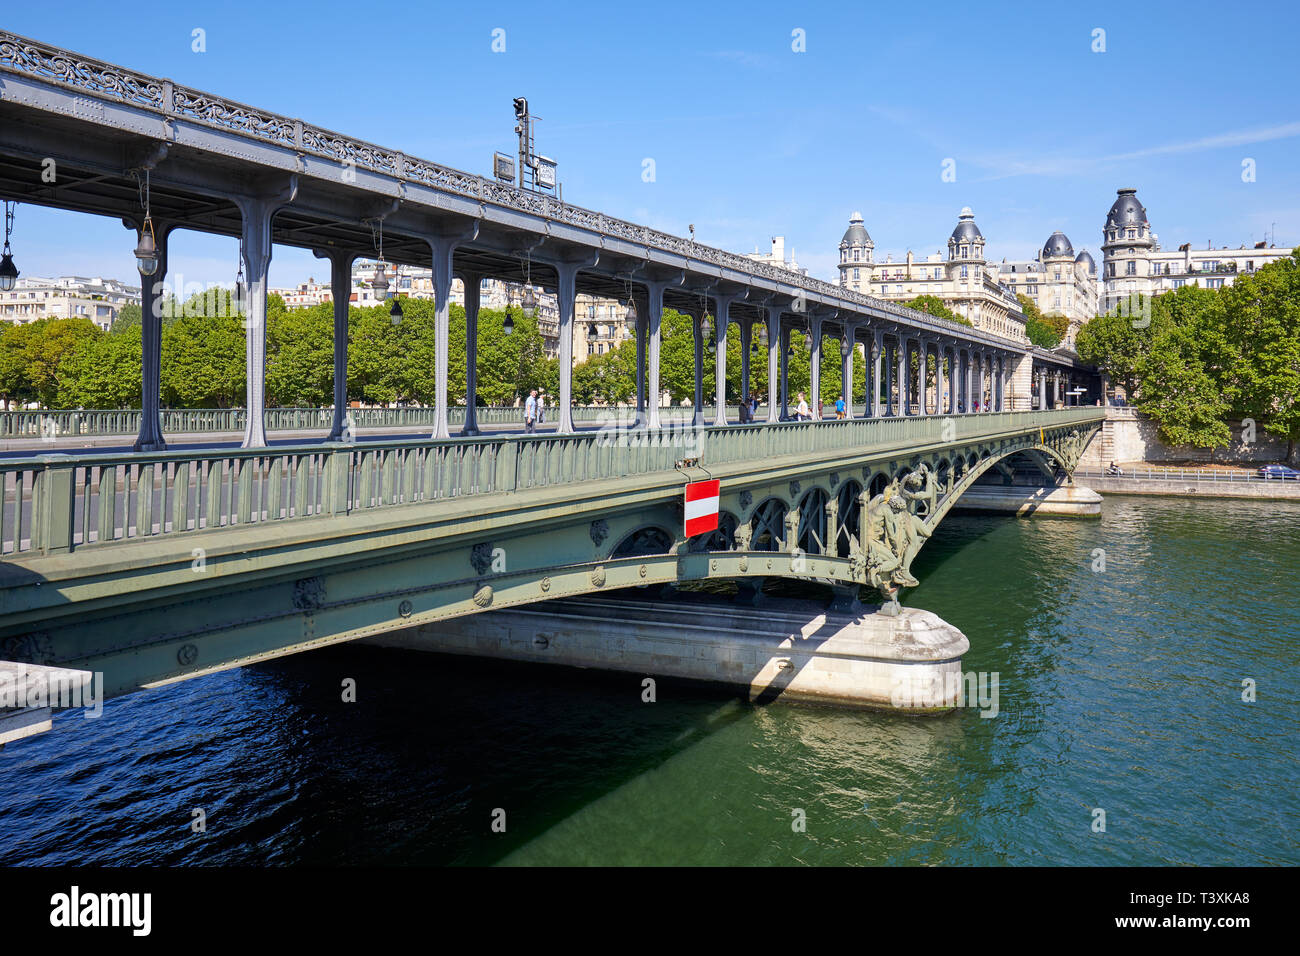 PARIS, FRANCE - JULY 21, 2017: Famous Bir Hakeim bridge with people and tourists in a sunny summer day in Paris, France. Stock Photo